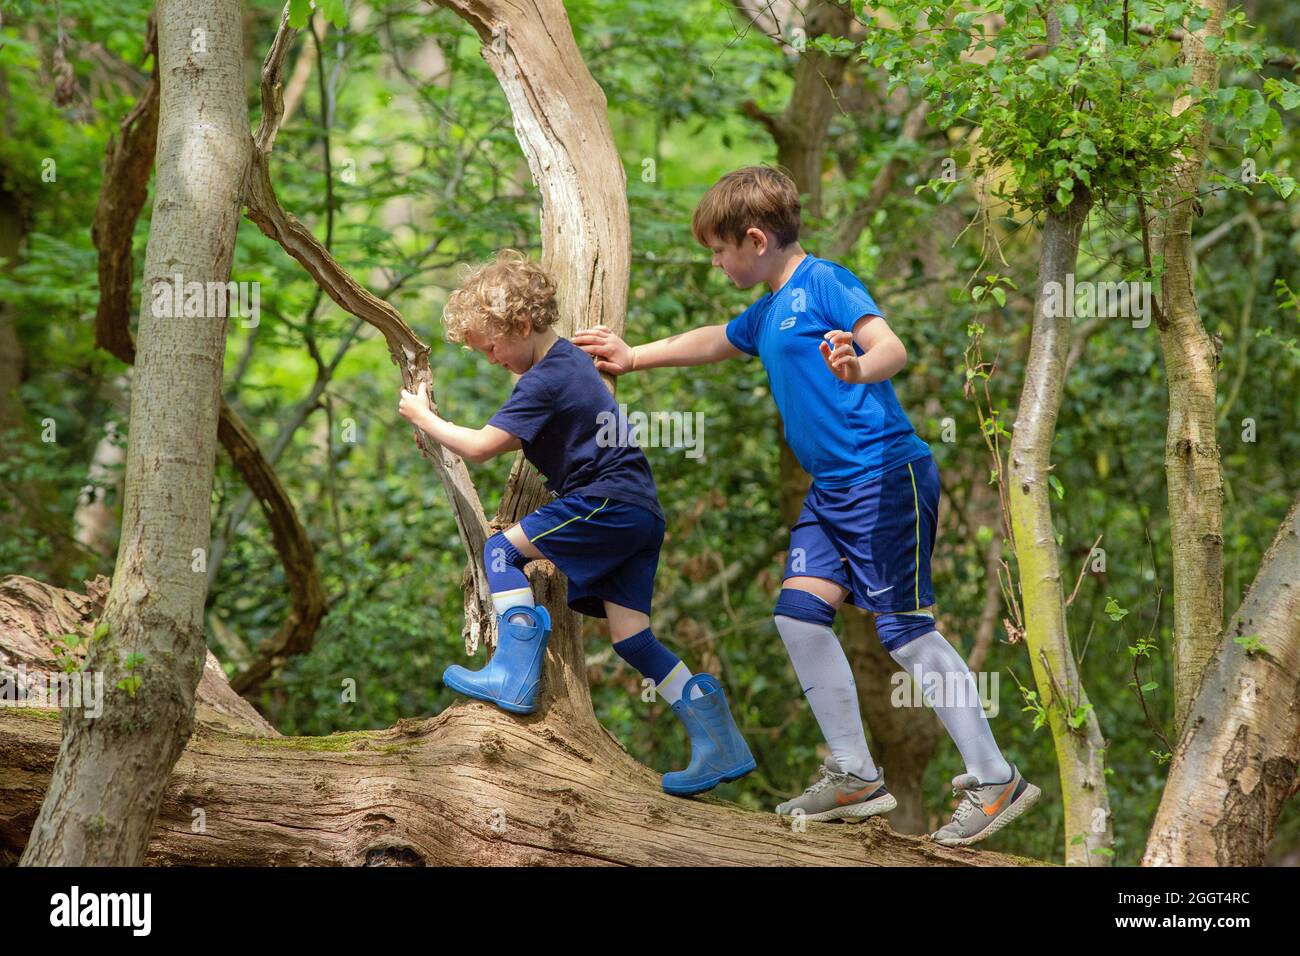 Two young boys, brothers, siblings, climbing, clambering, balancing on a fallen dead tree trunk in woodland. Shared nature finding and discovery. Rura Stock Photo